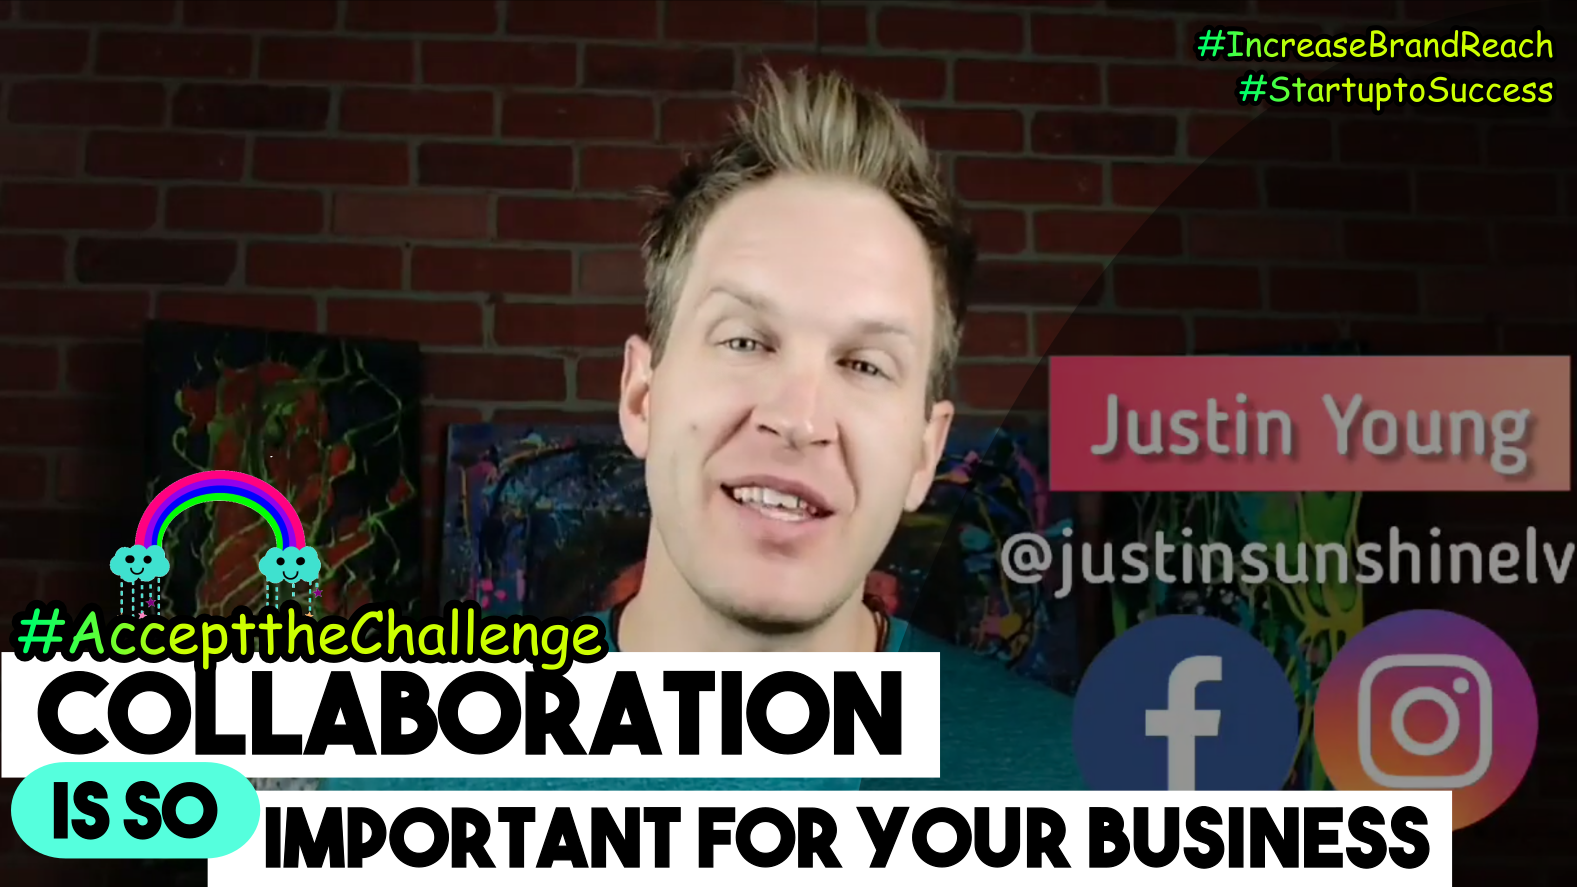 Why Business Collaboration is SO Important for Your Startup or Existing Business-CHALLENGE ACCEPTED! Justin Young